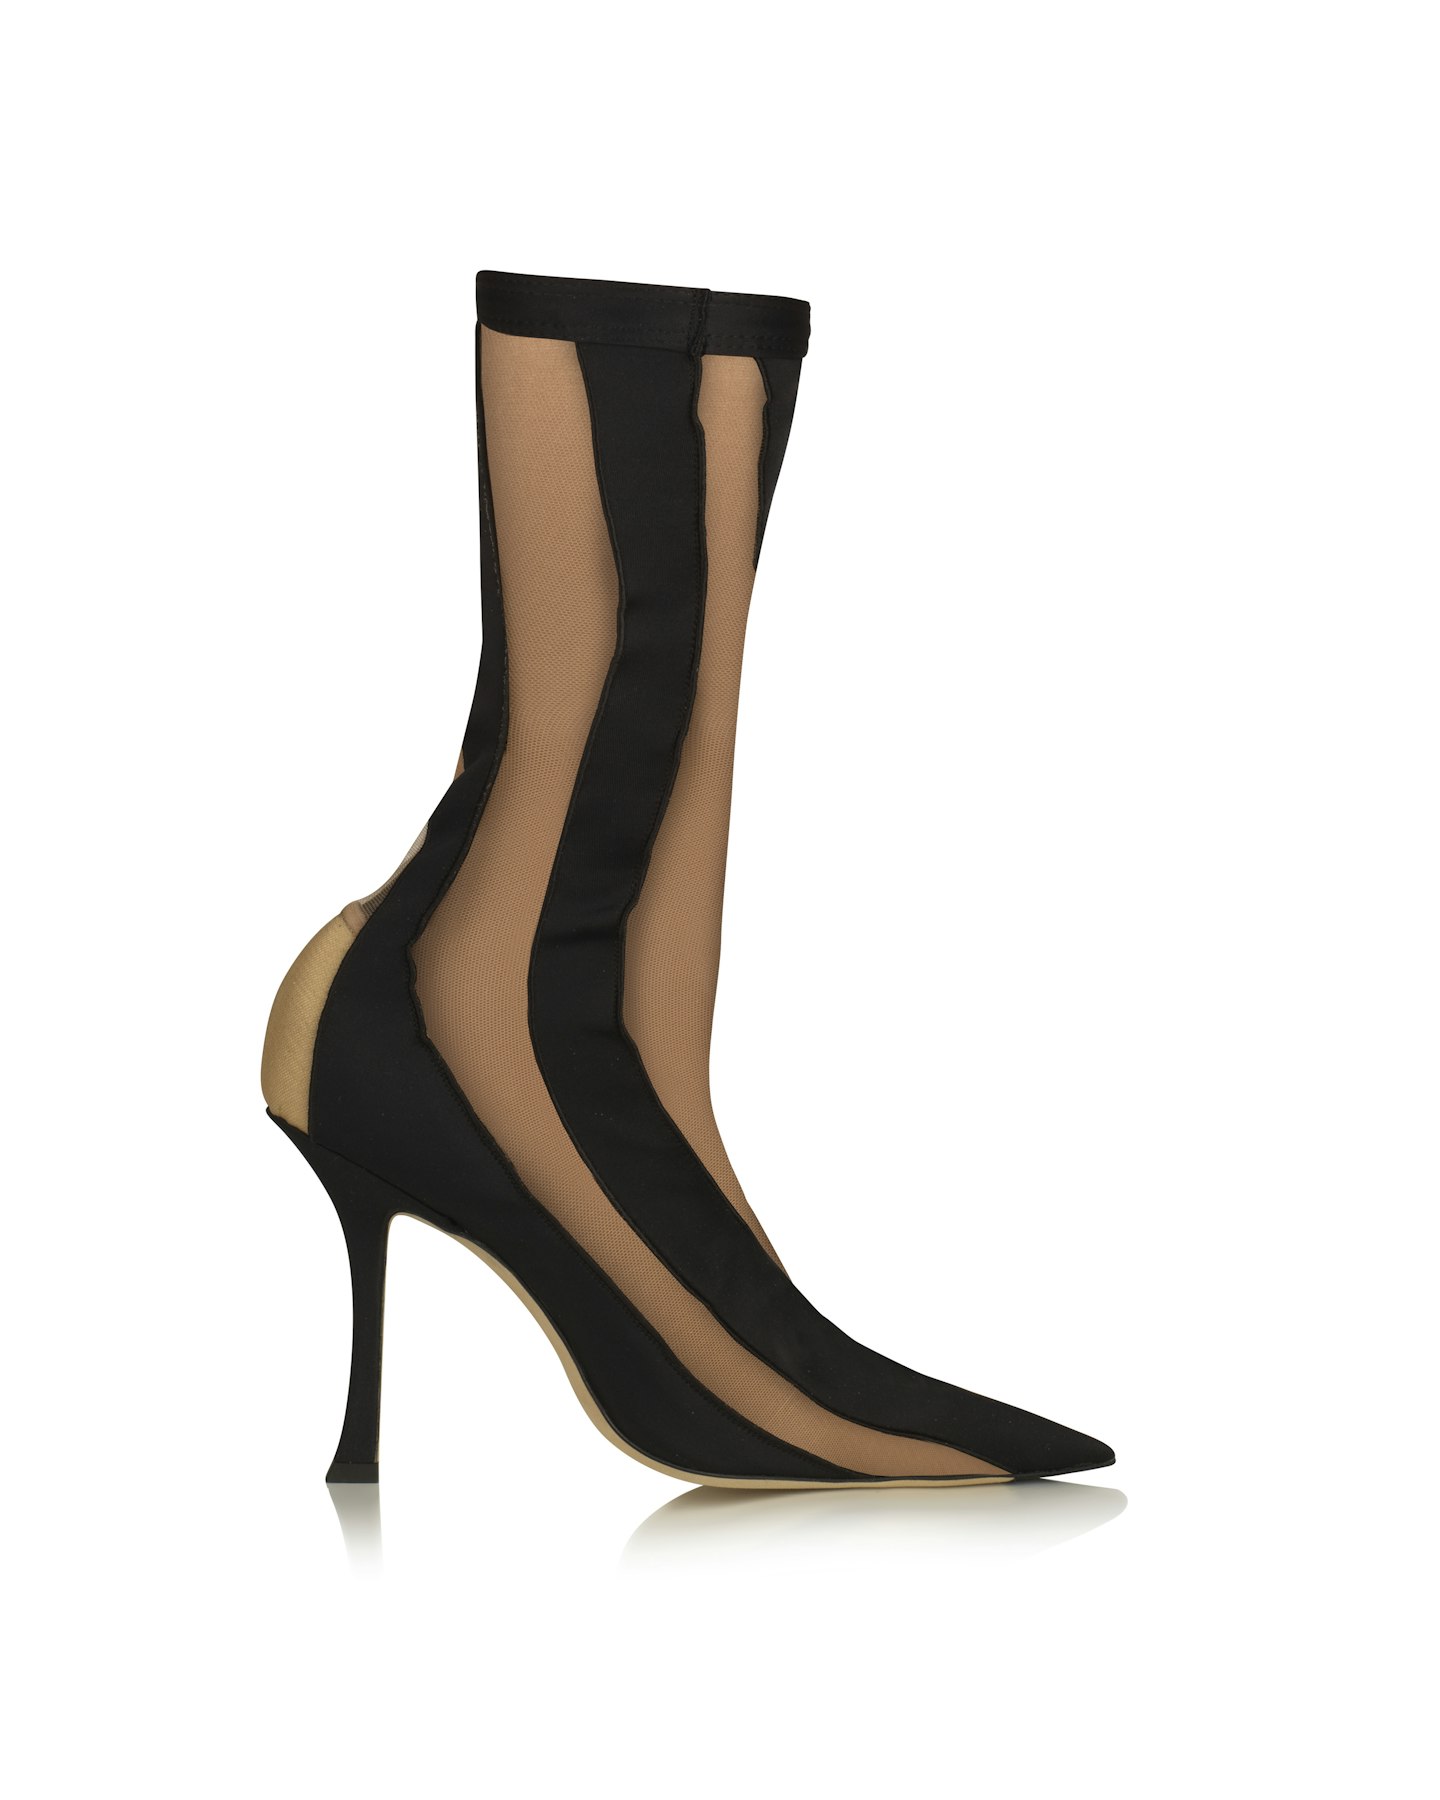 Jimmy Choo Mugler Black and Nude Sheer Spiral Stretch Fabric Sock Ankle Boots, £1,050